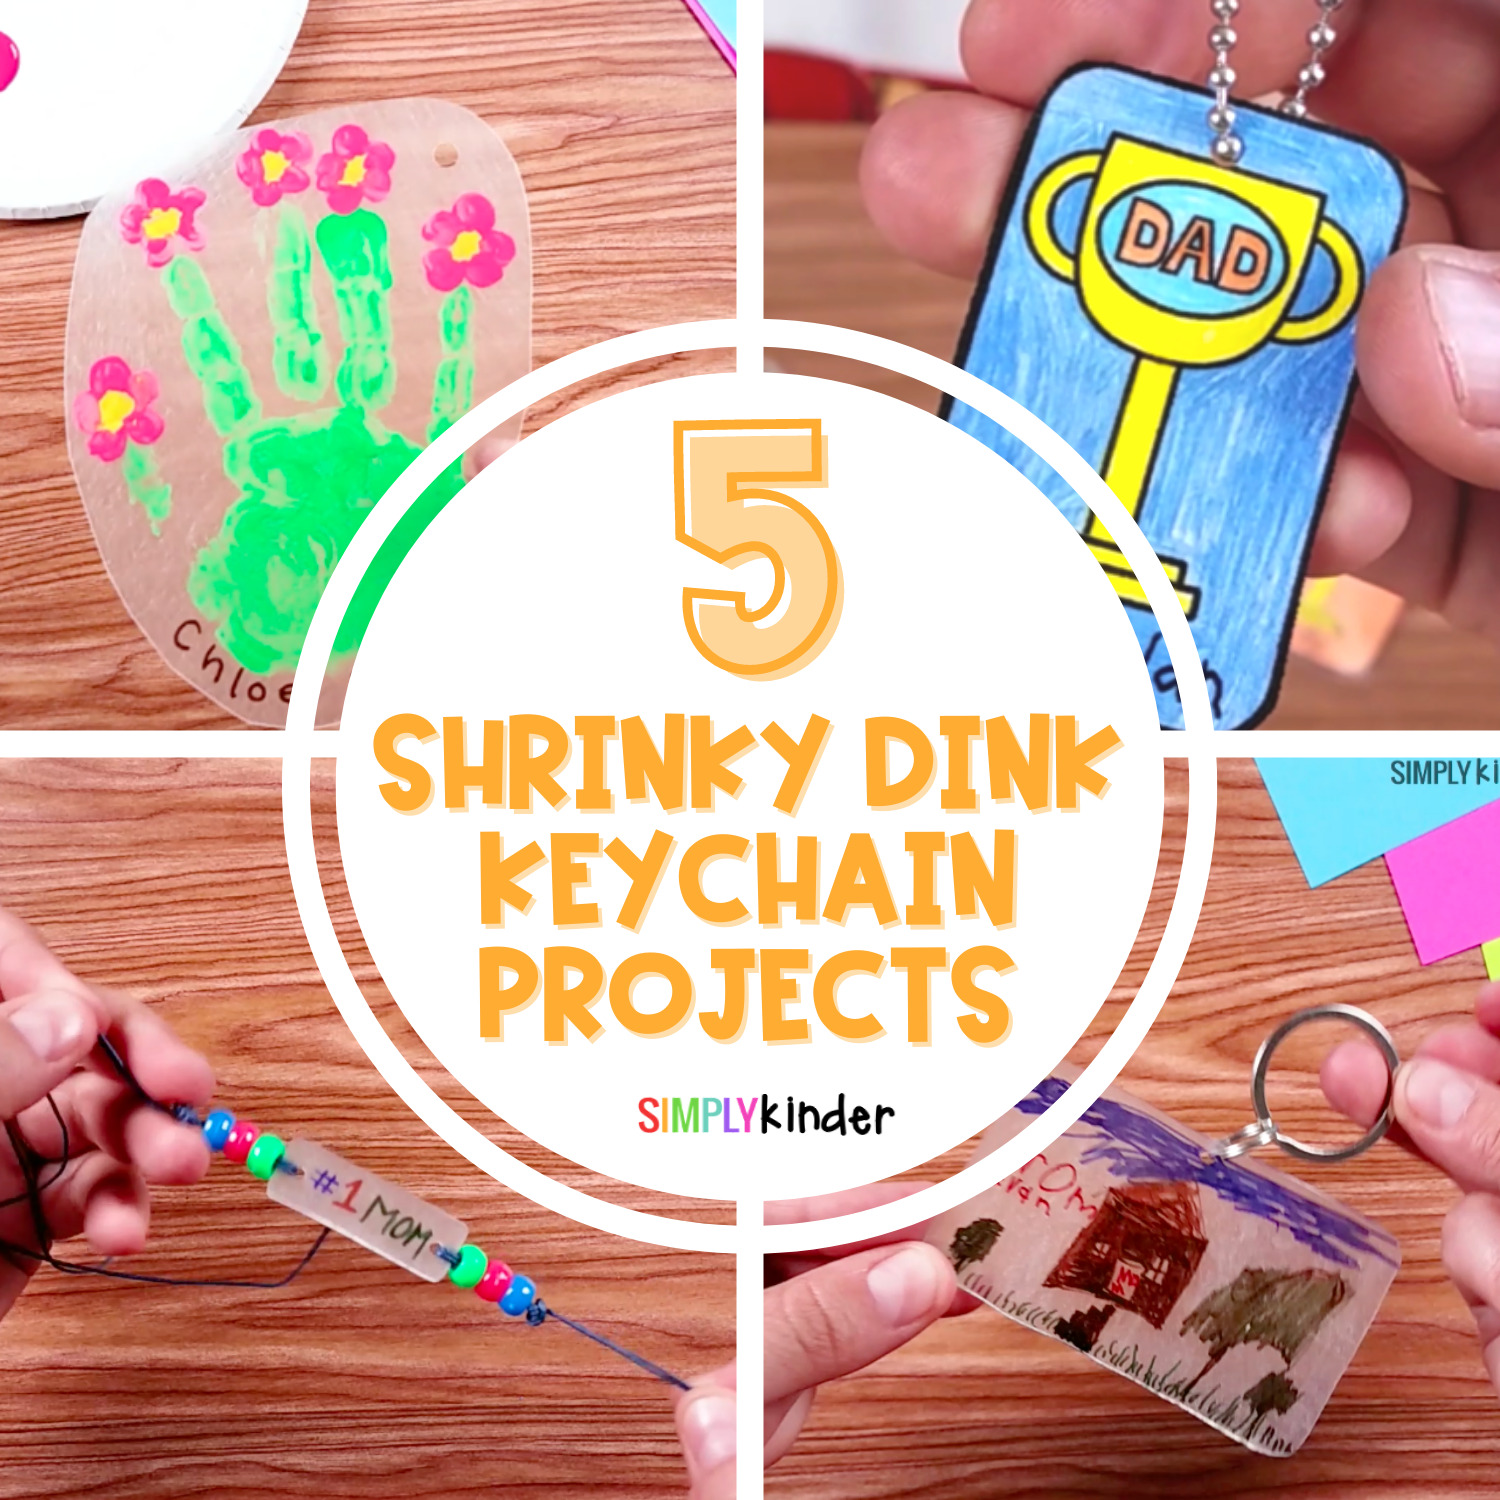 Five Shrinky Dinks Keychain Projects - Simply Kinder